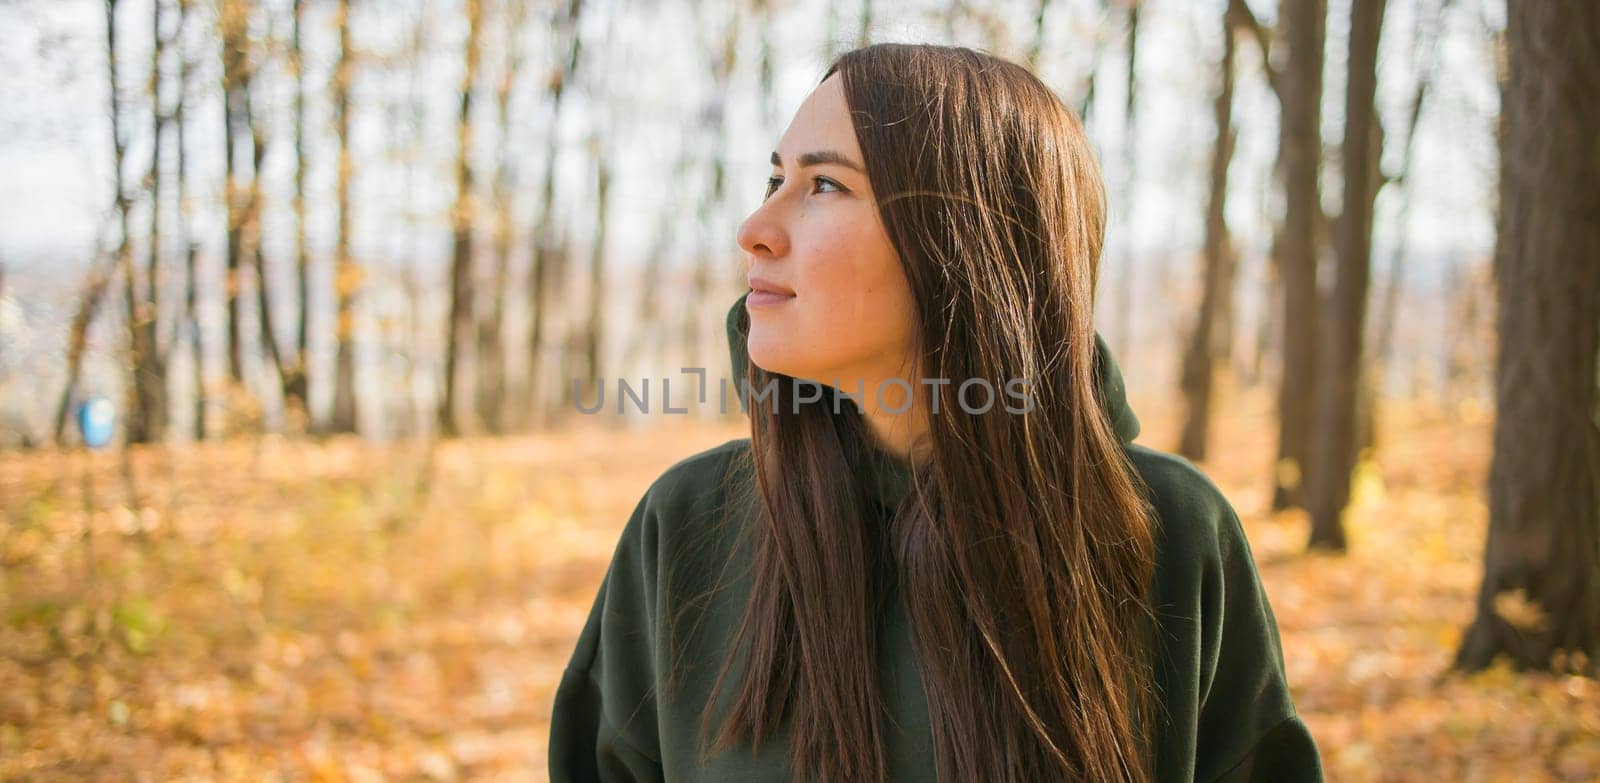 Banner millennial smiling woman walking outdoors in autumn nature with empty place for advertising text, Fall season copy space and mock up by Satura86